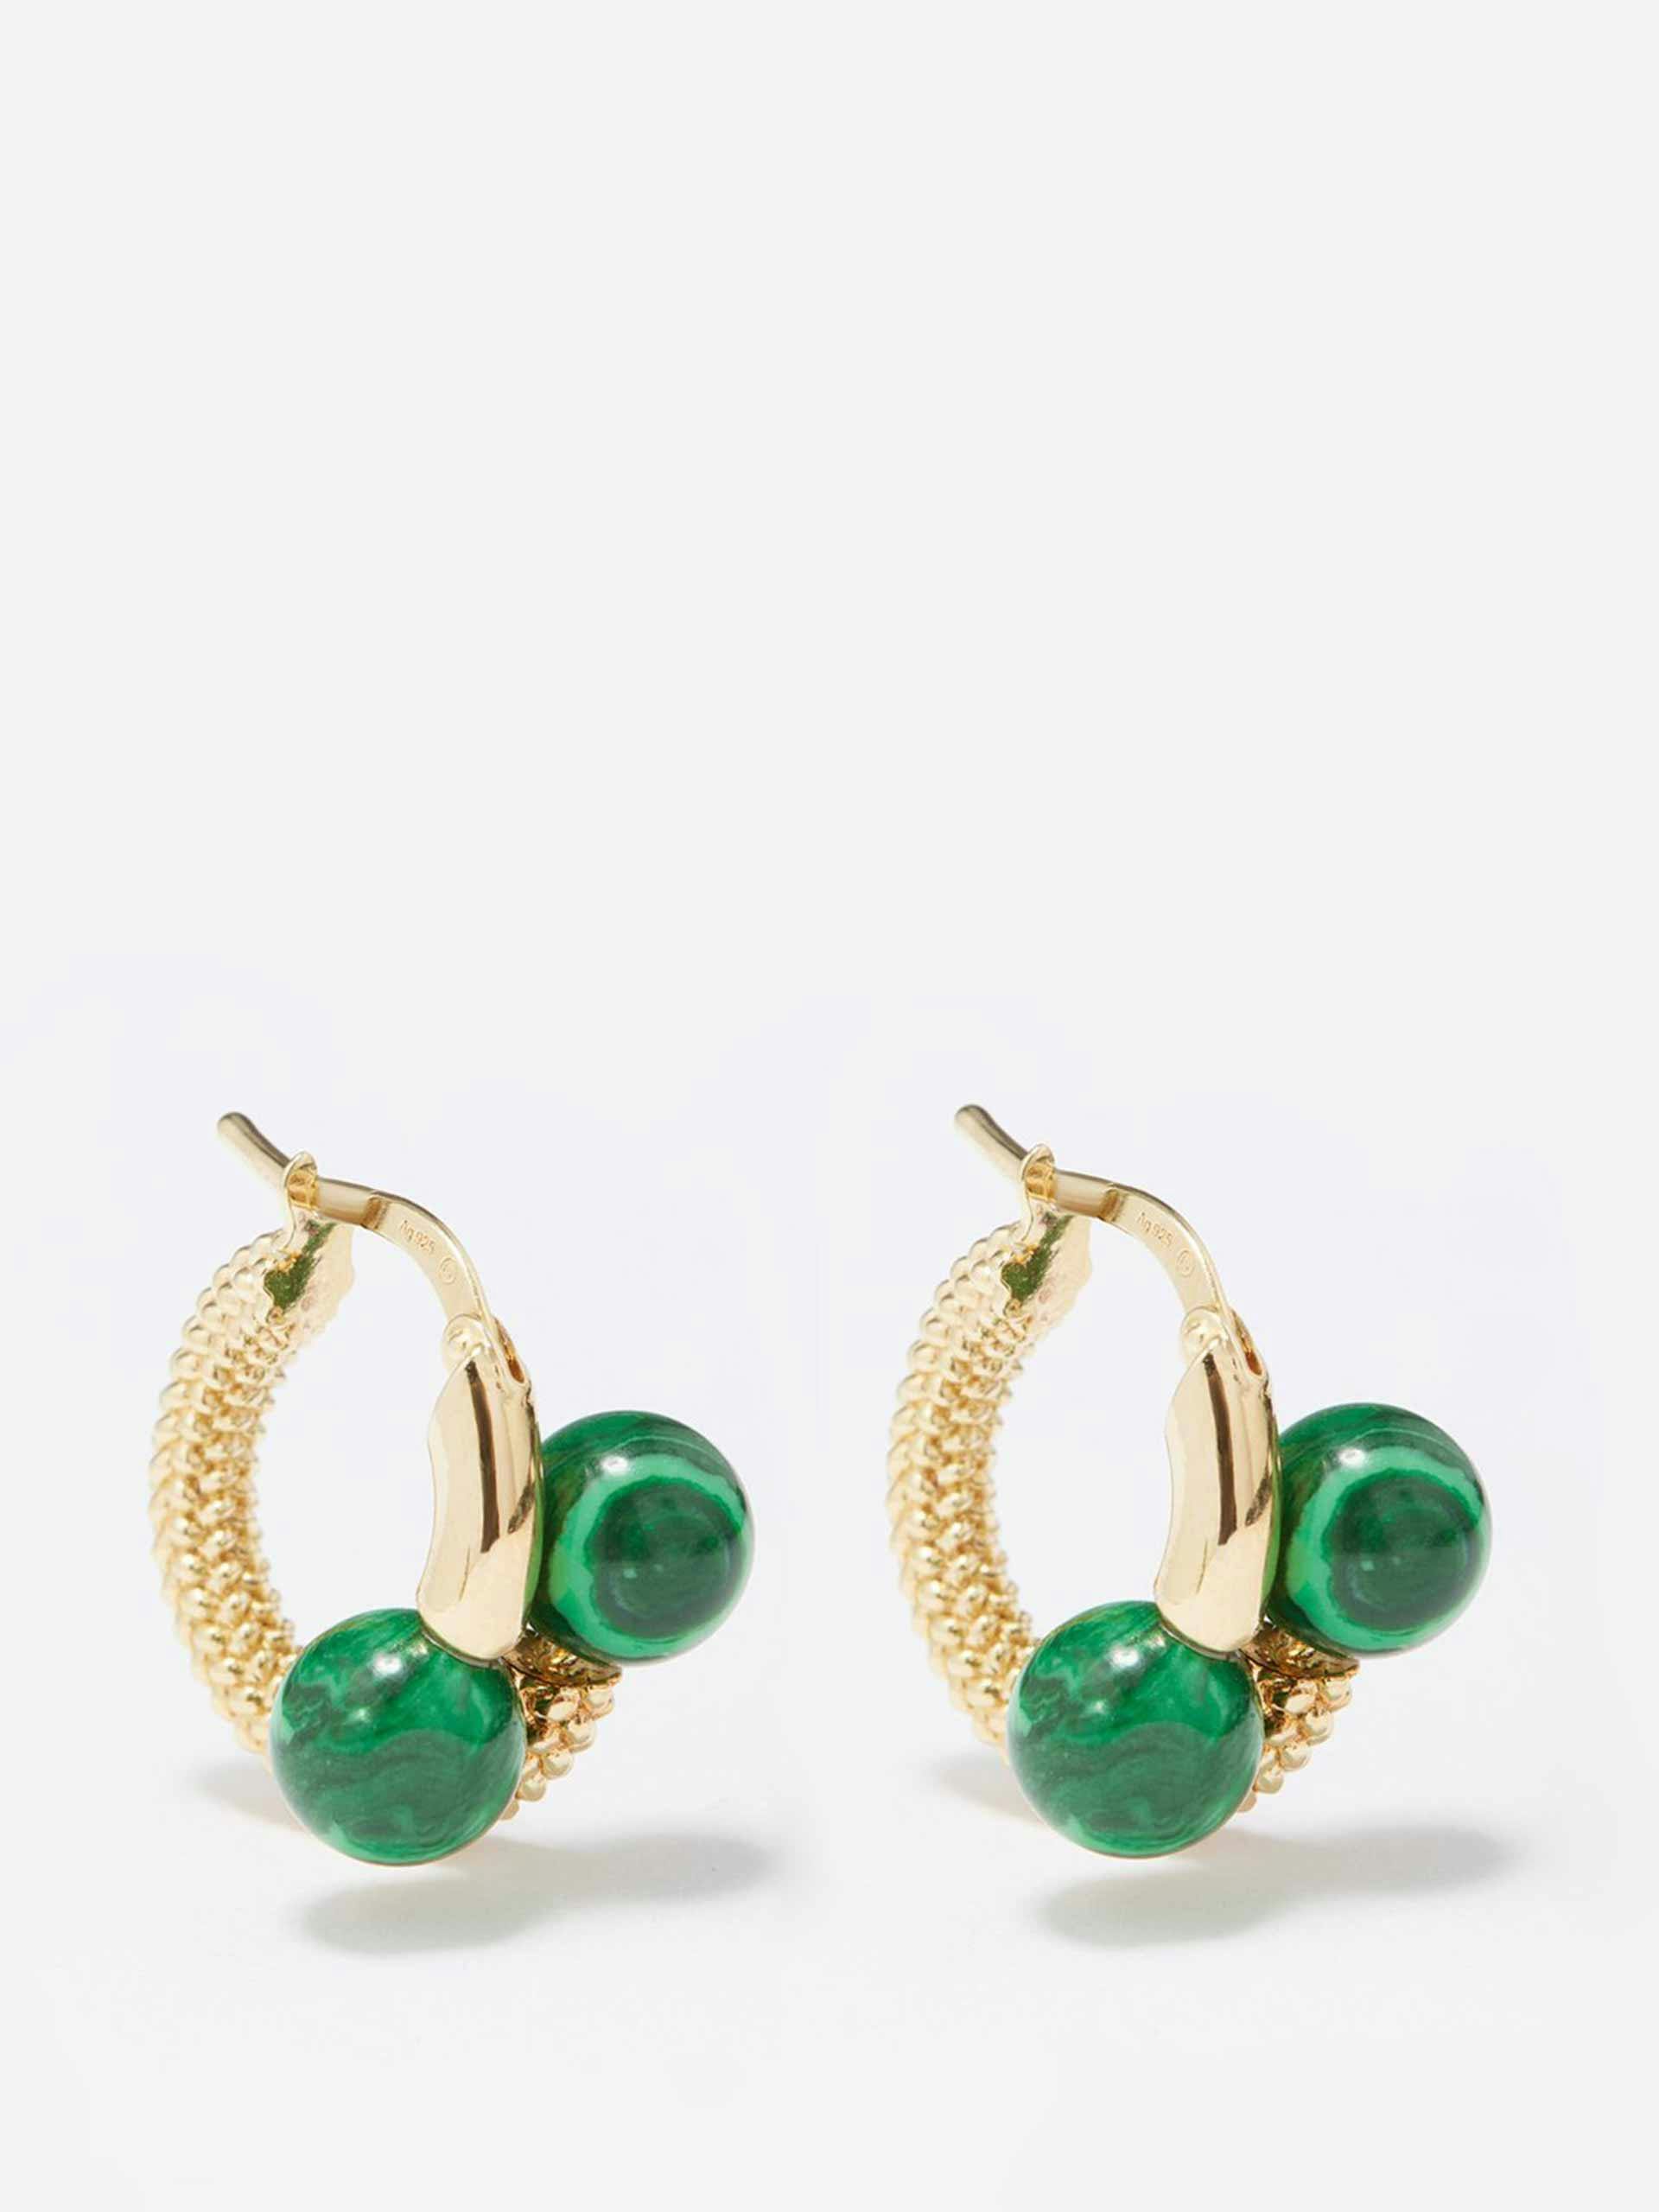 Faux-malachite and 18kt gold-plated earrings